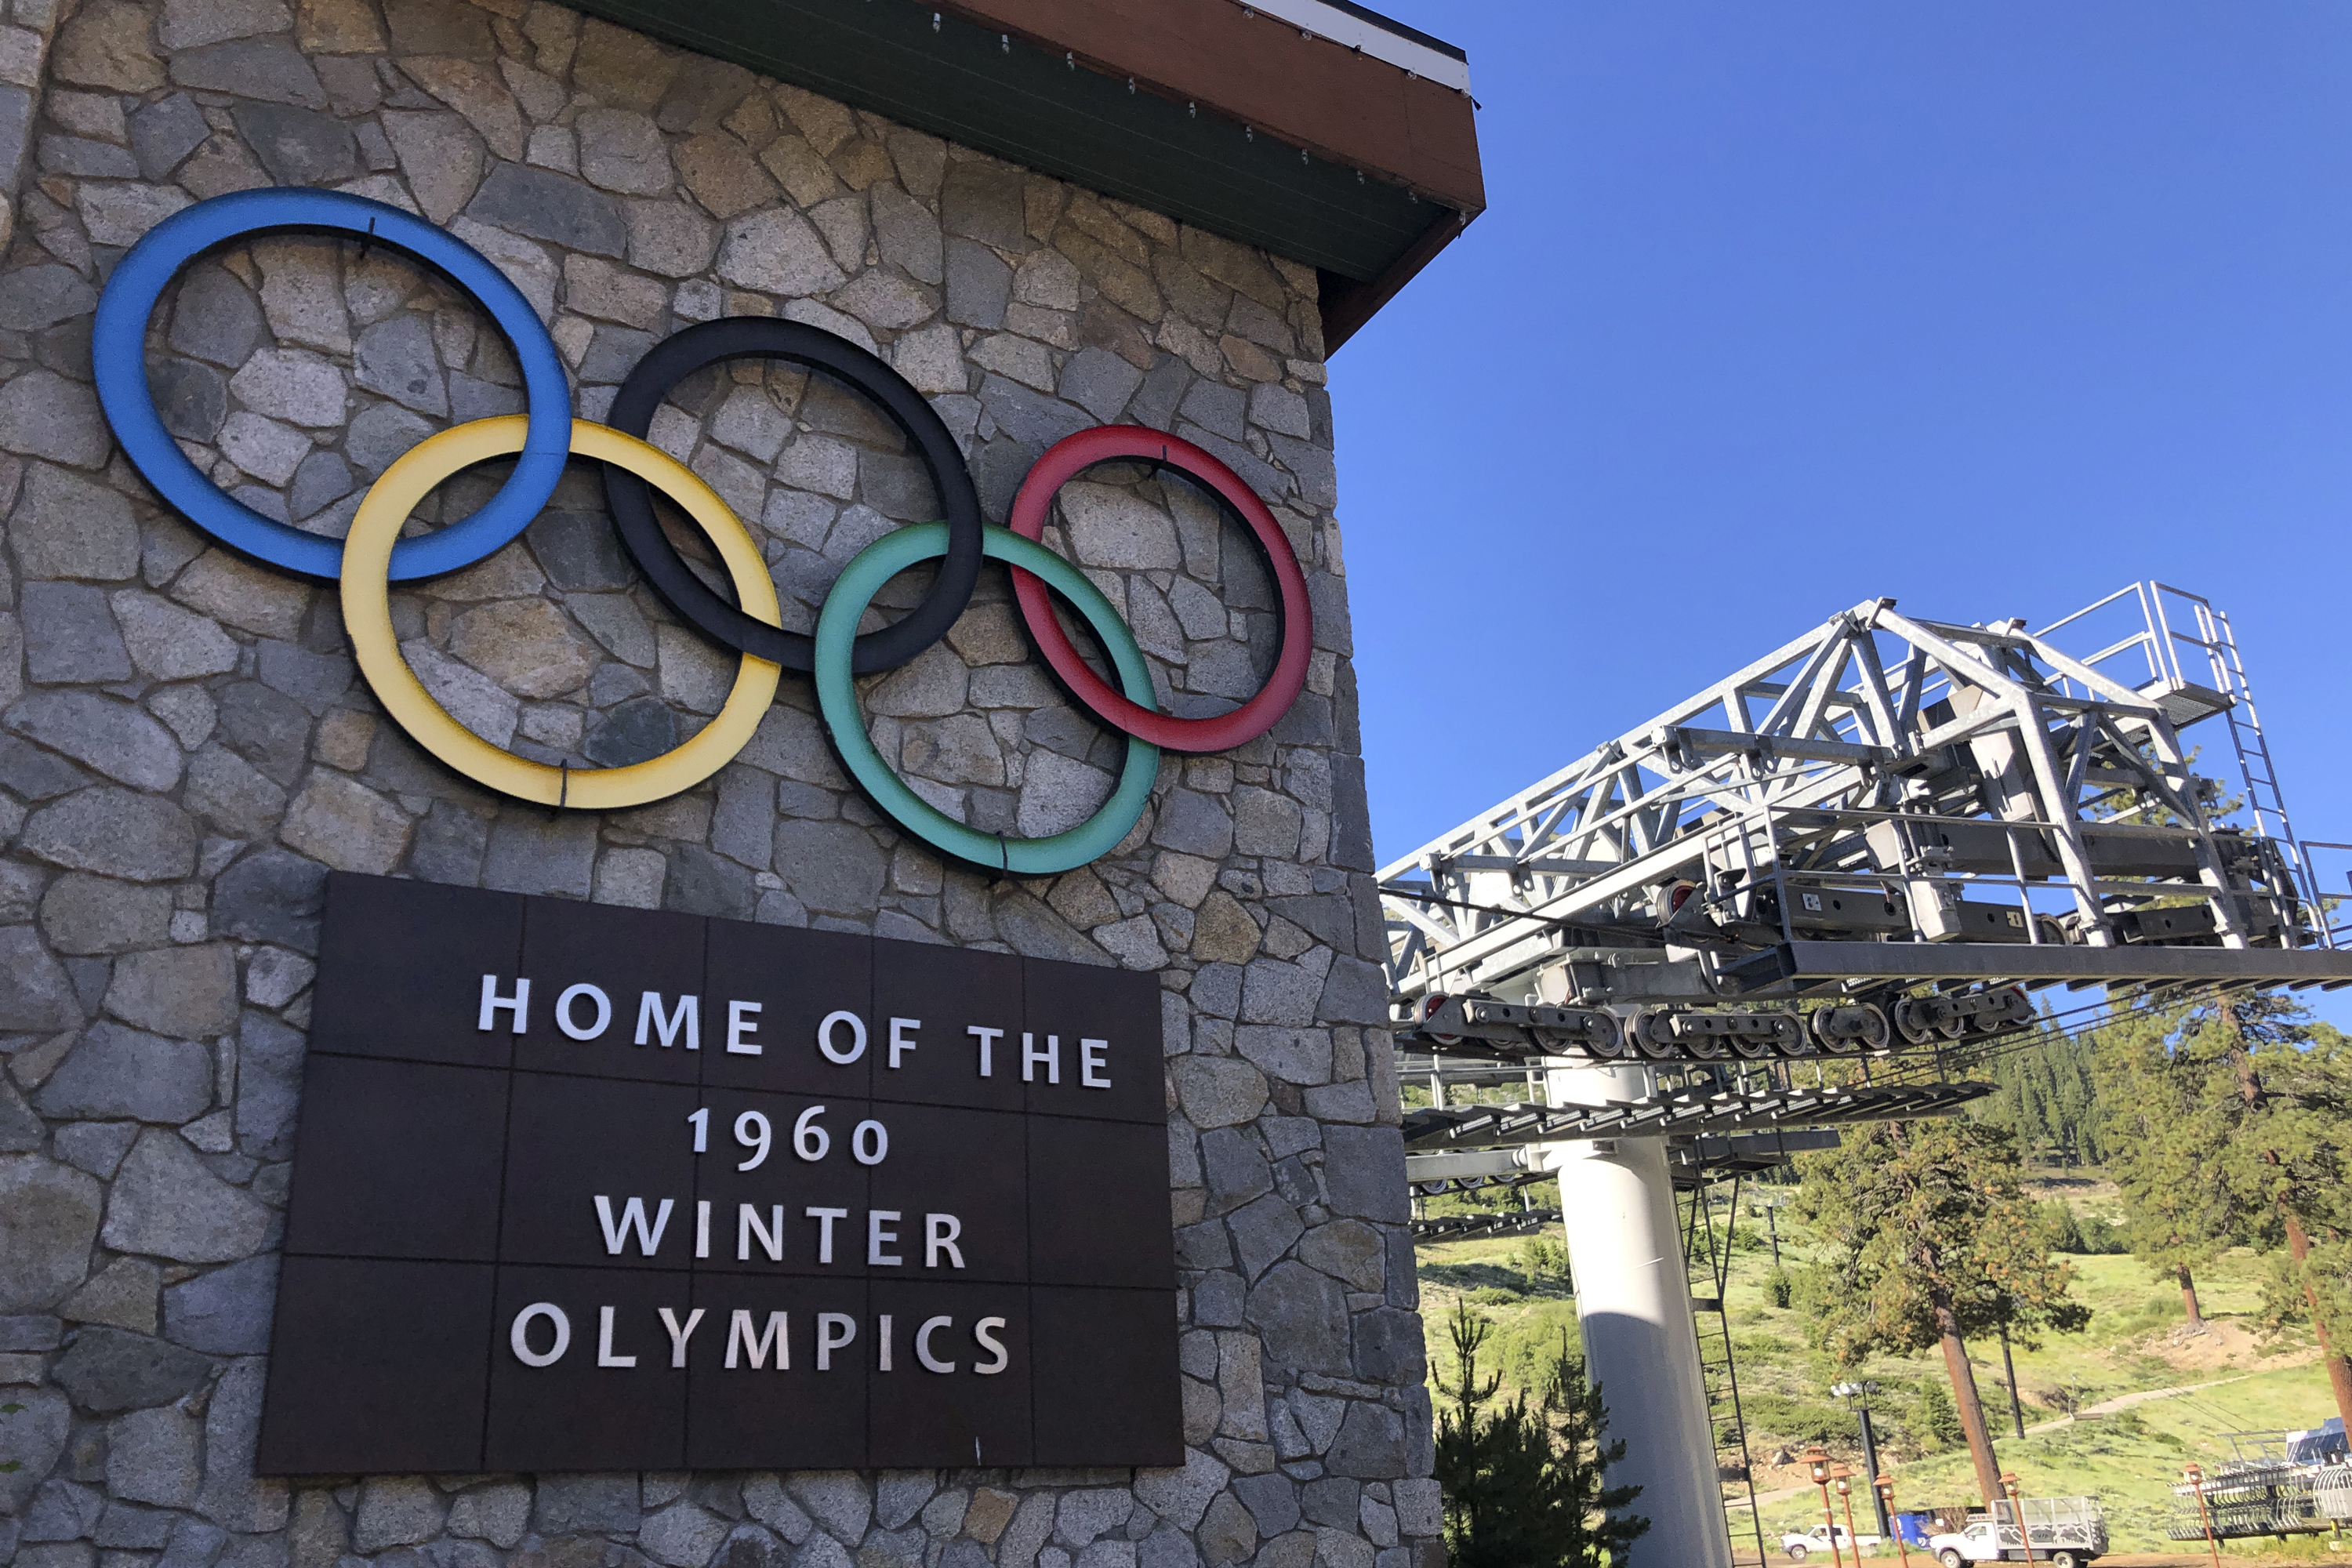 A sign marking the 1960 Winter Olympics is seen by a chairlift at Squaw Valley Ski Resort in Olympic Valley.